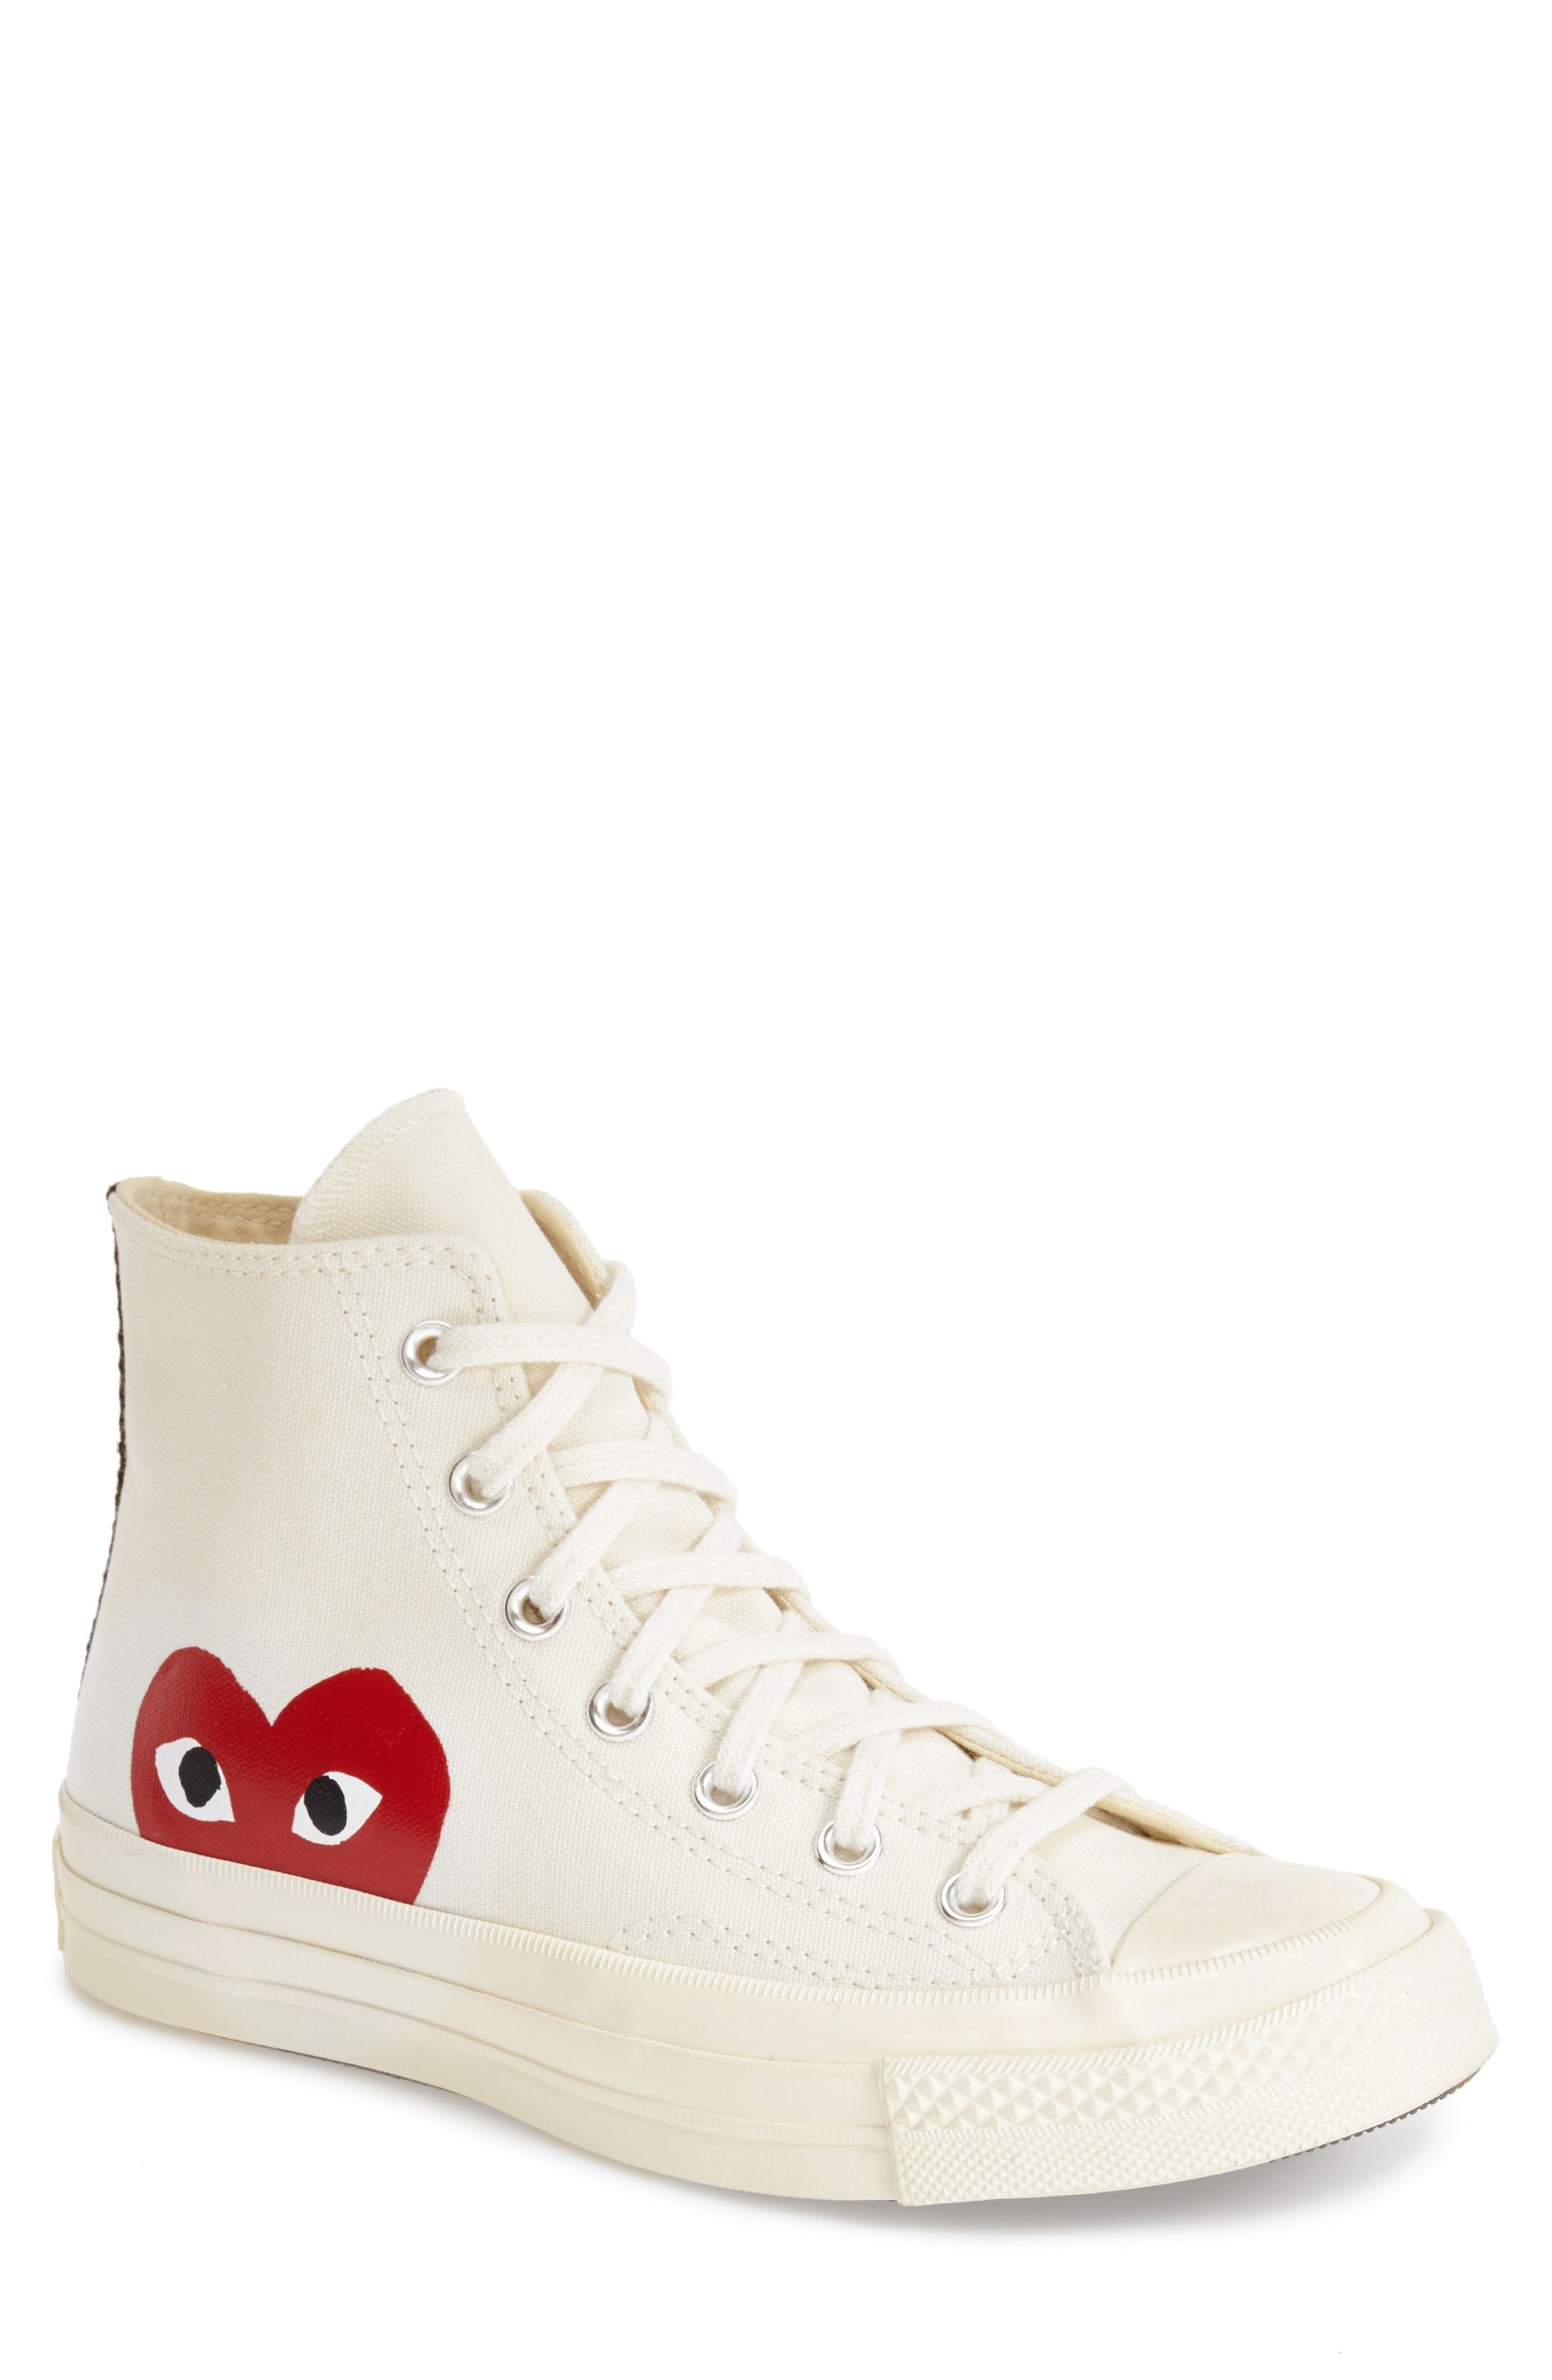 black converse high tops with red heart